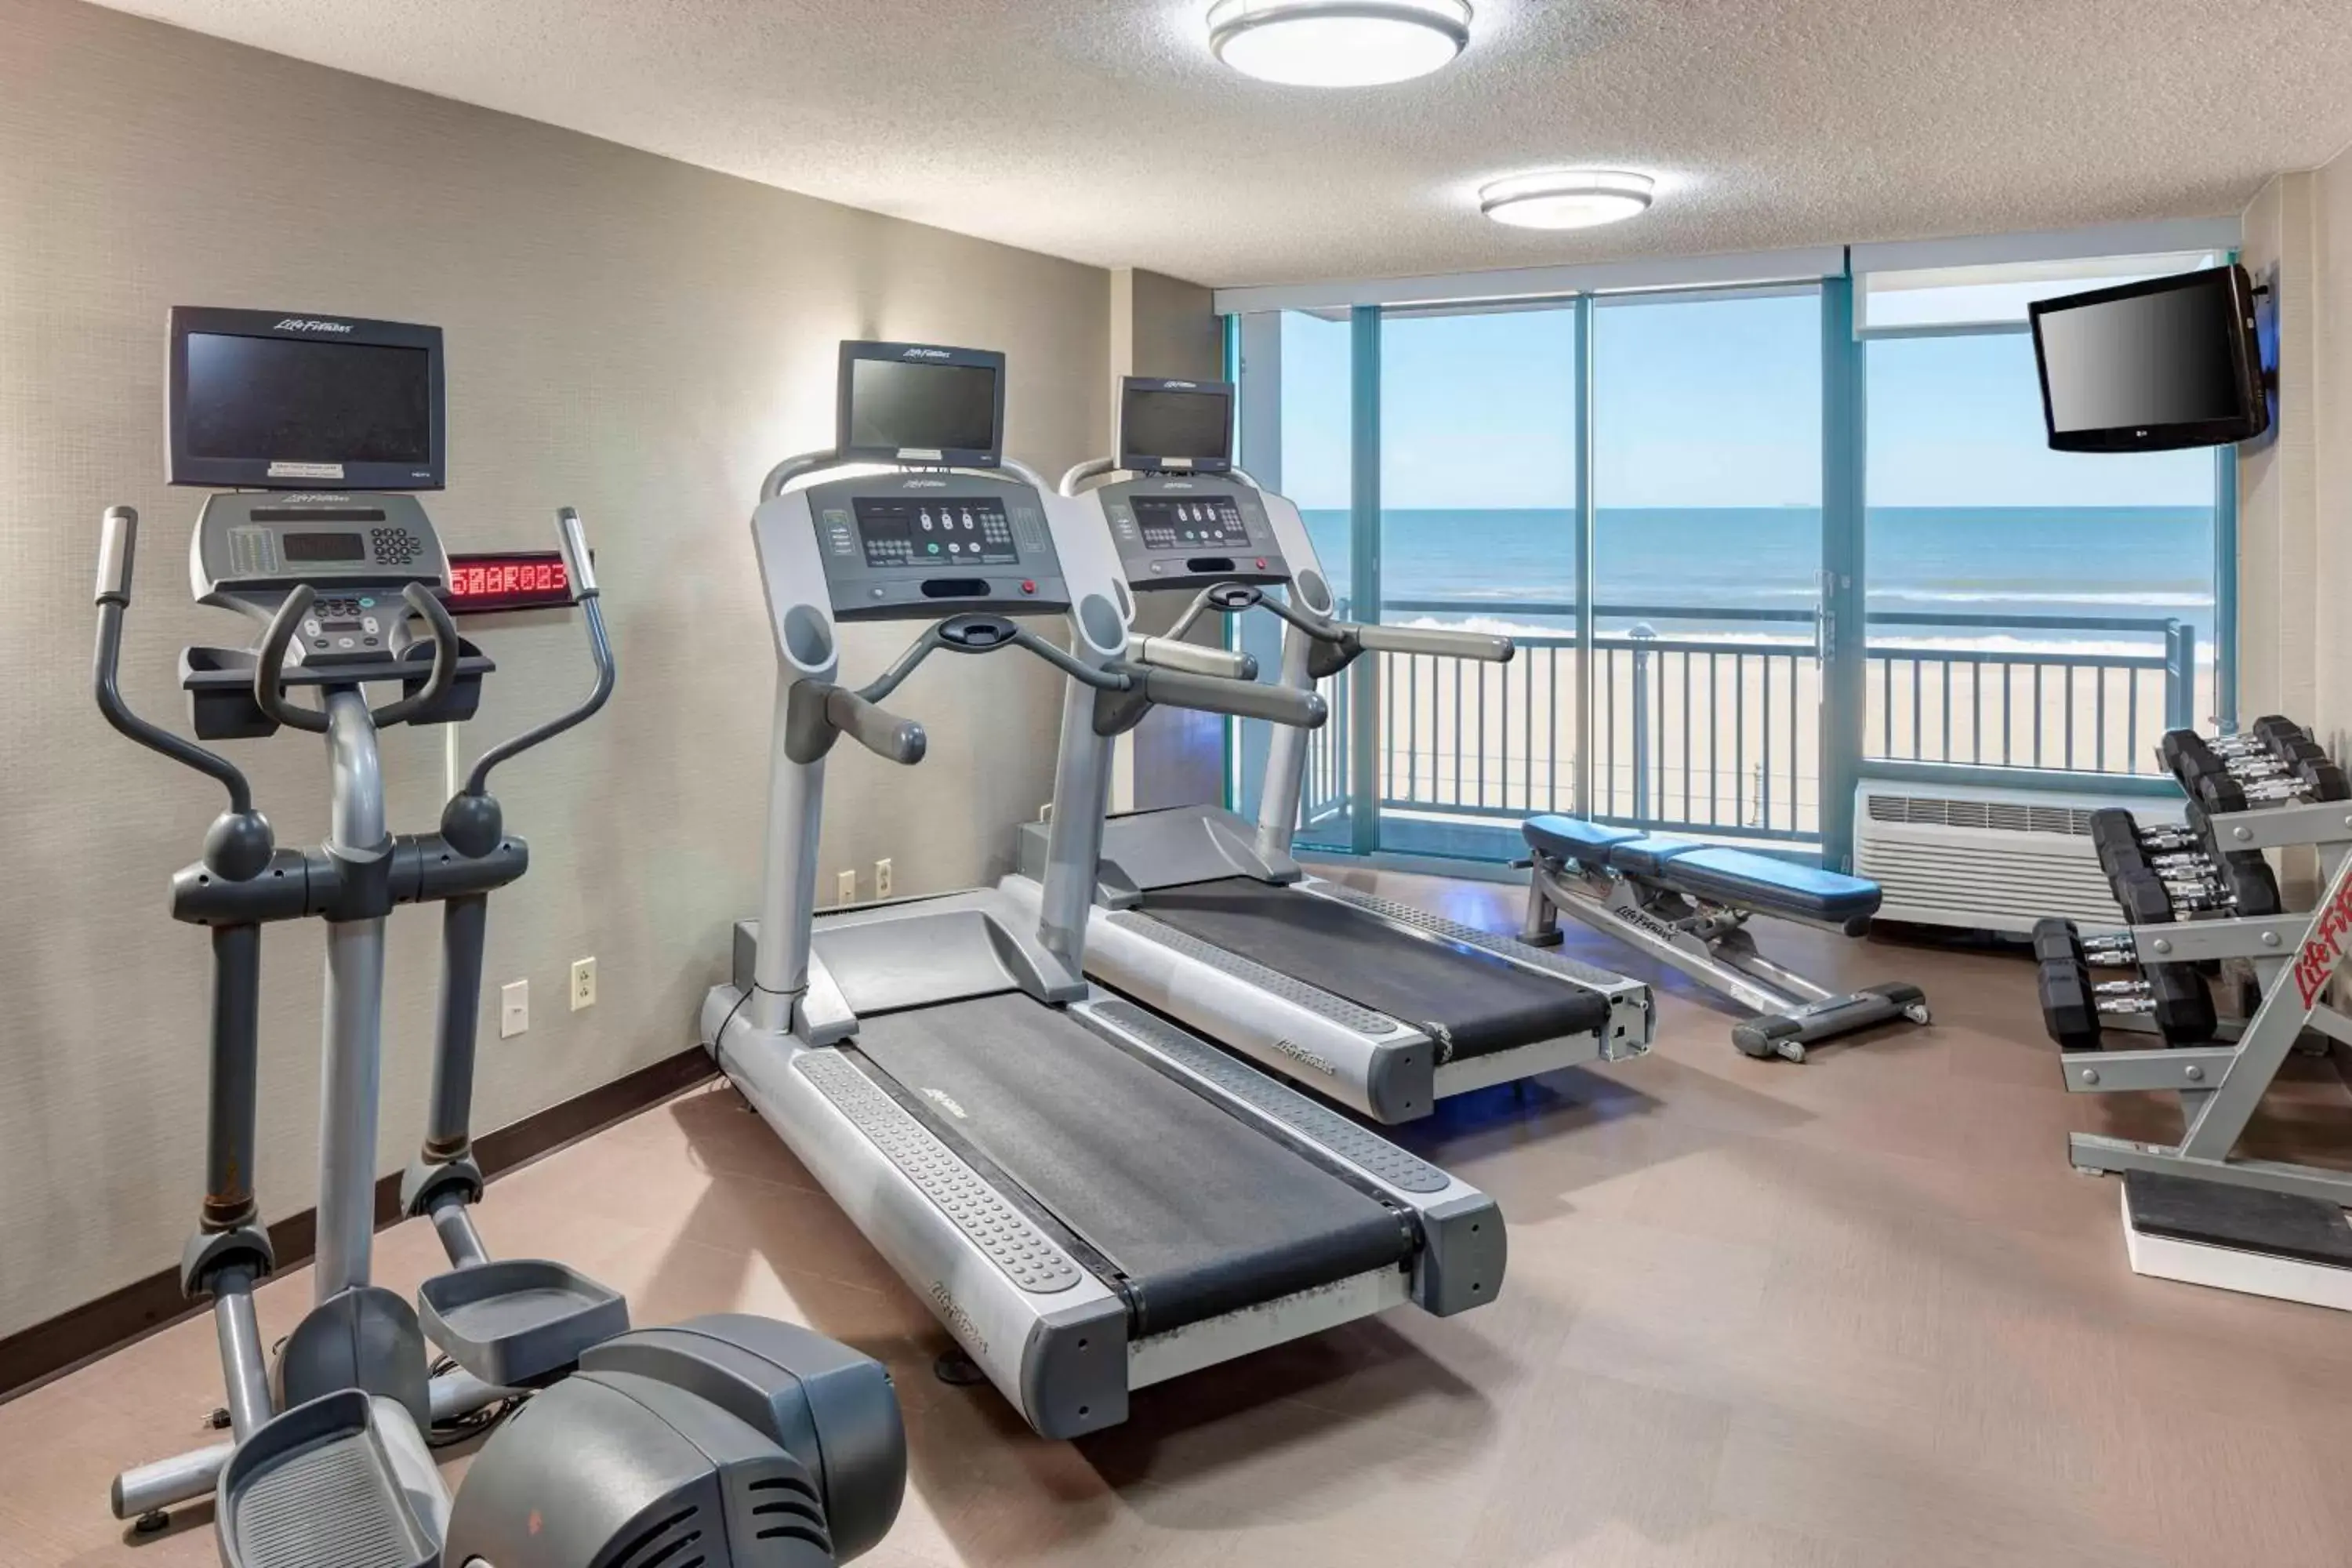 Fitness centre/facilities, Fitness Center/Facilities in Courtyard Virginia Beach Oceanfront/South